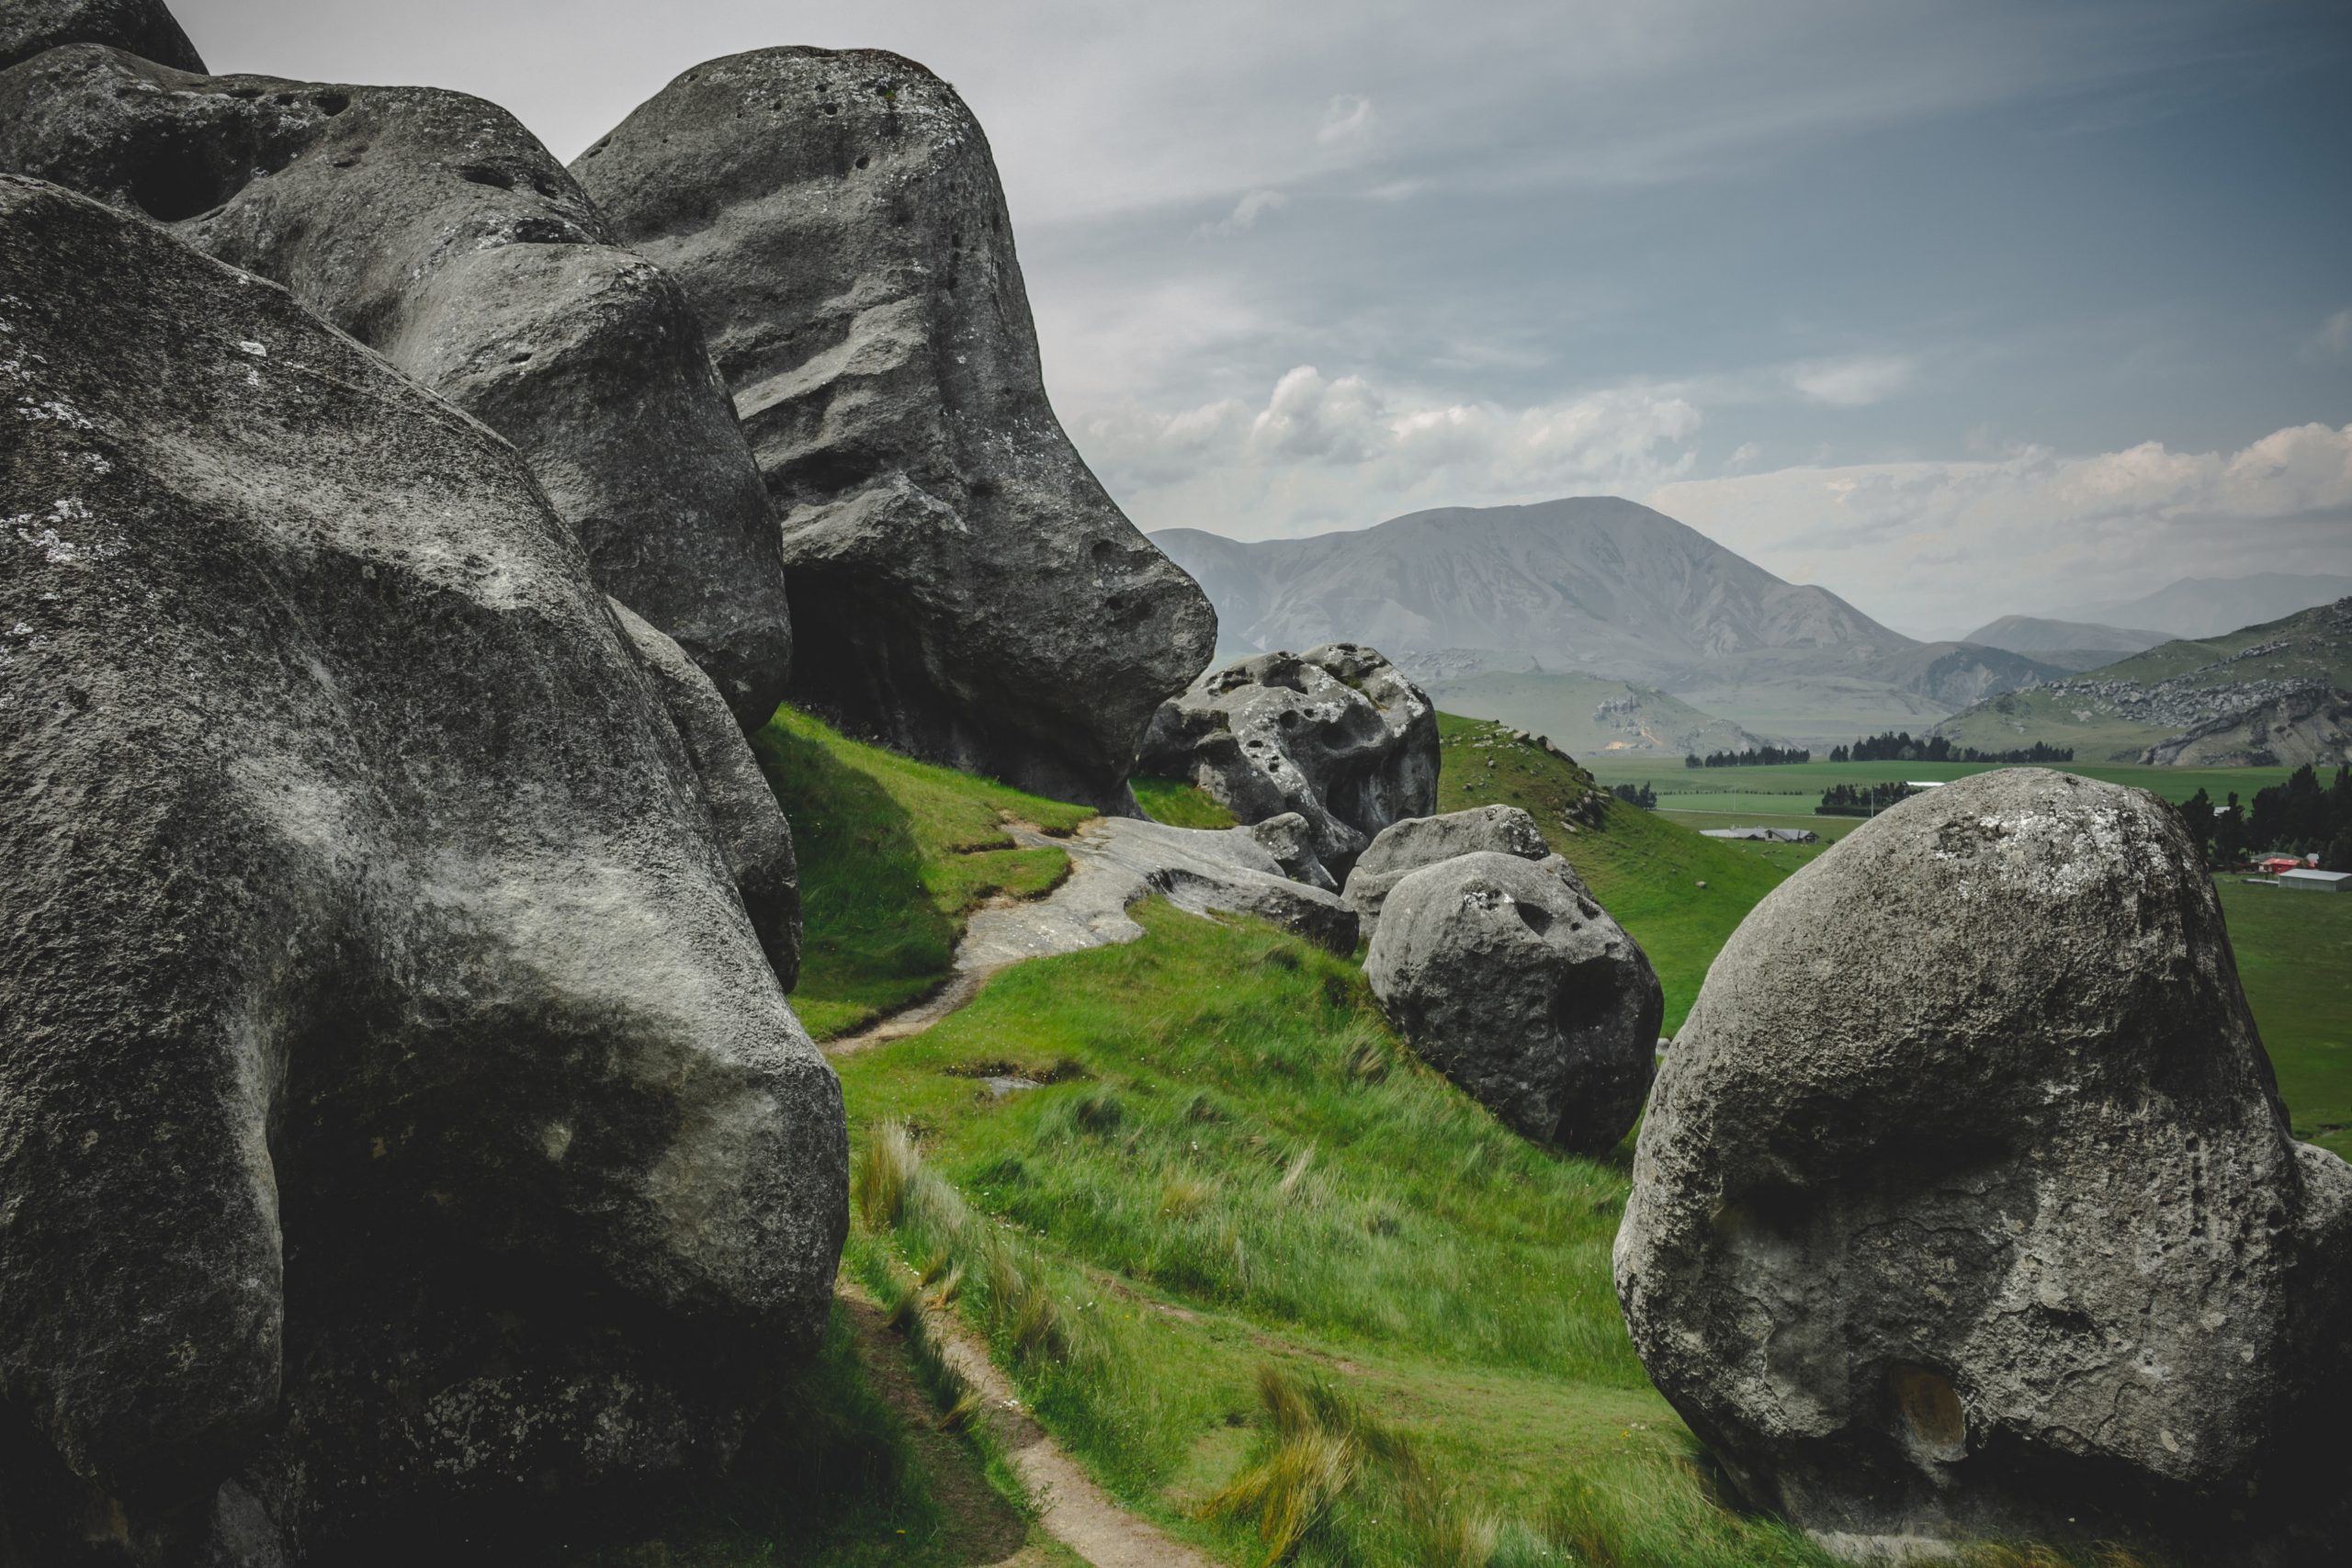 A green grassy path winding through giant grey boulders, with mountains in the backdrop.